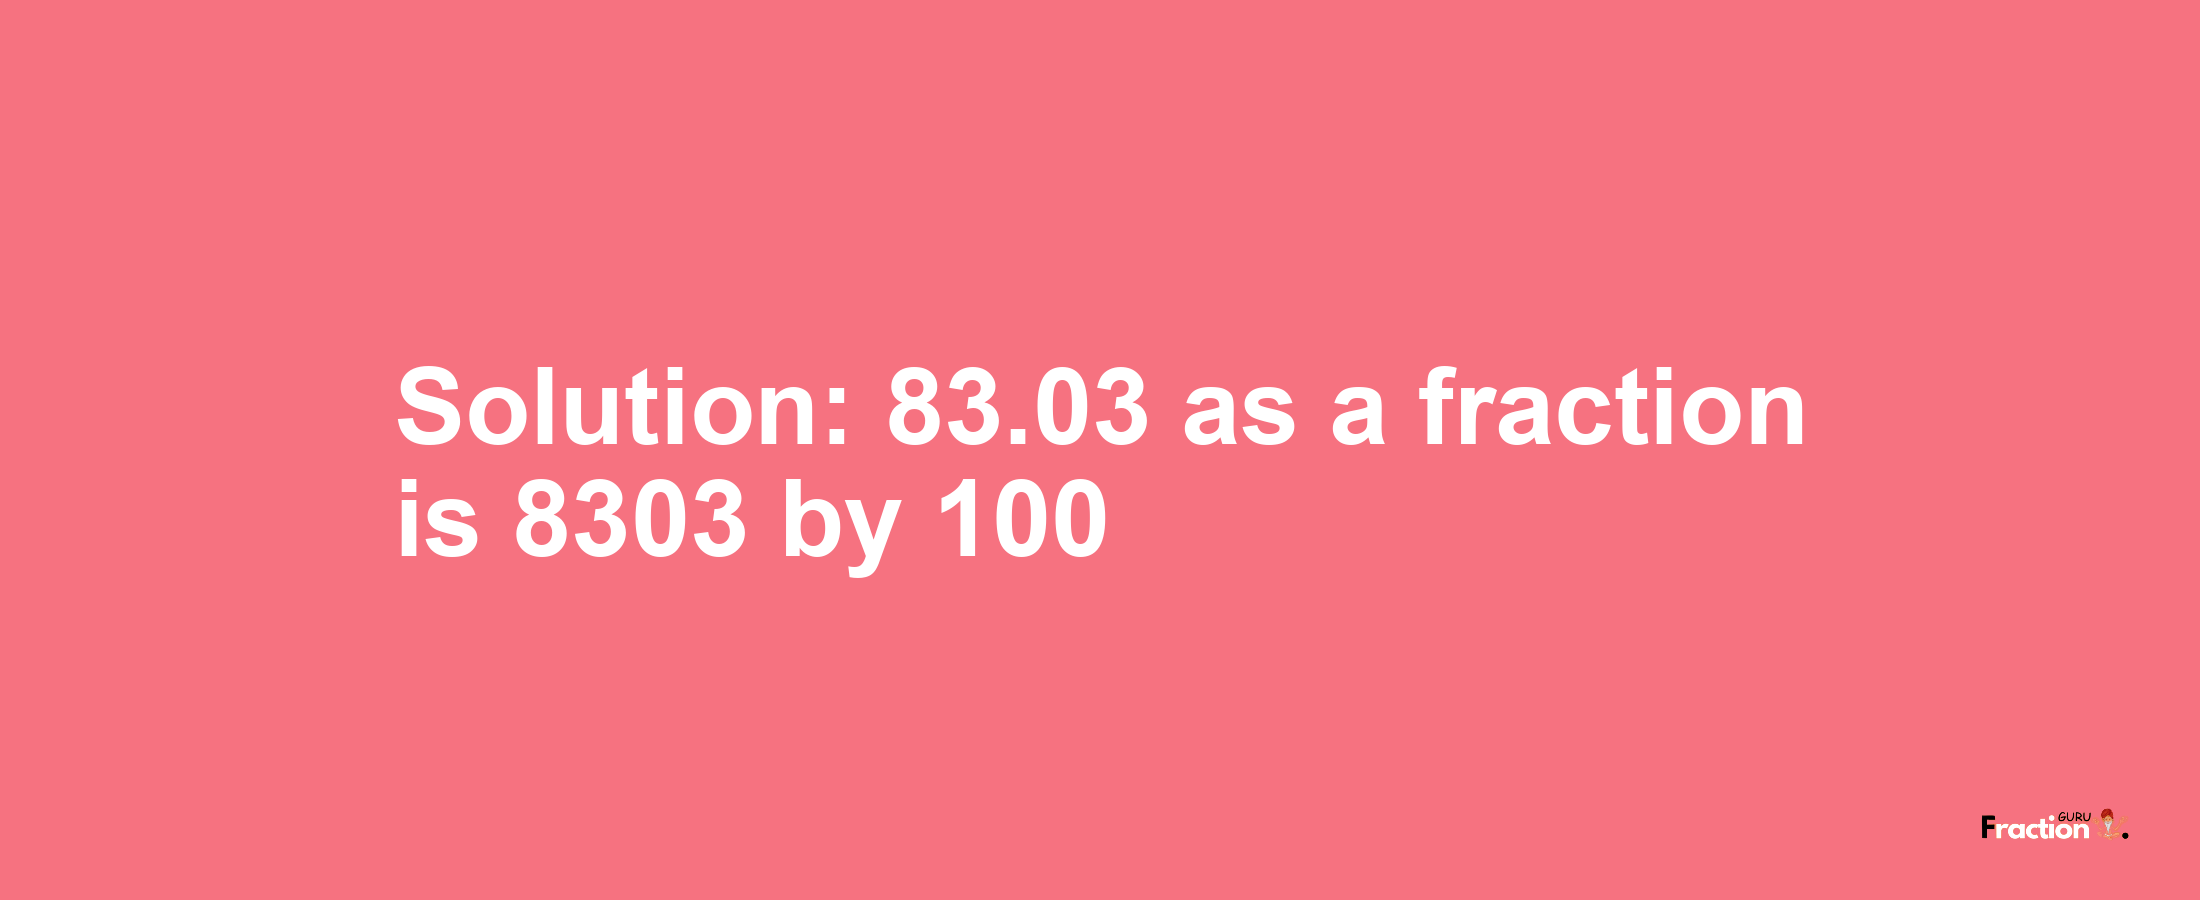 Solution:83.03 as a fraction is 8303/100